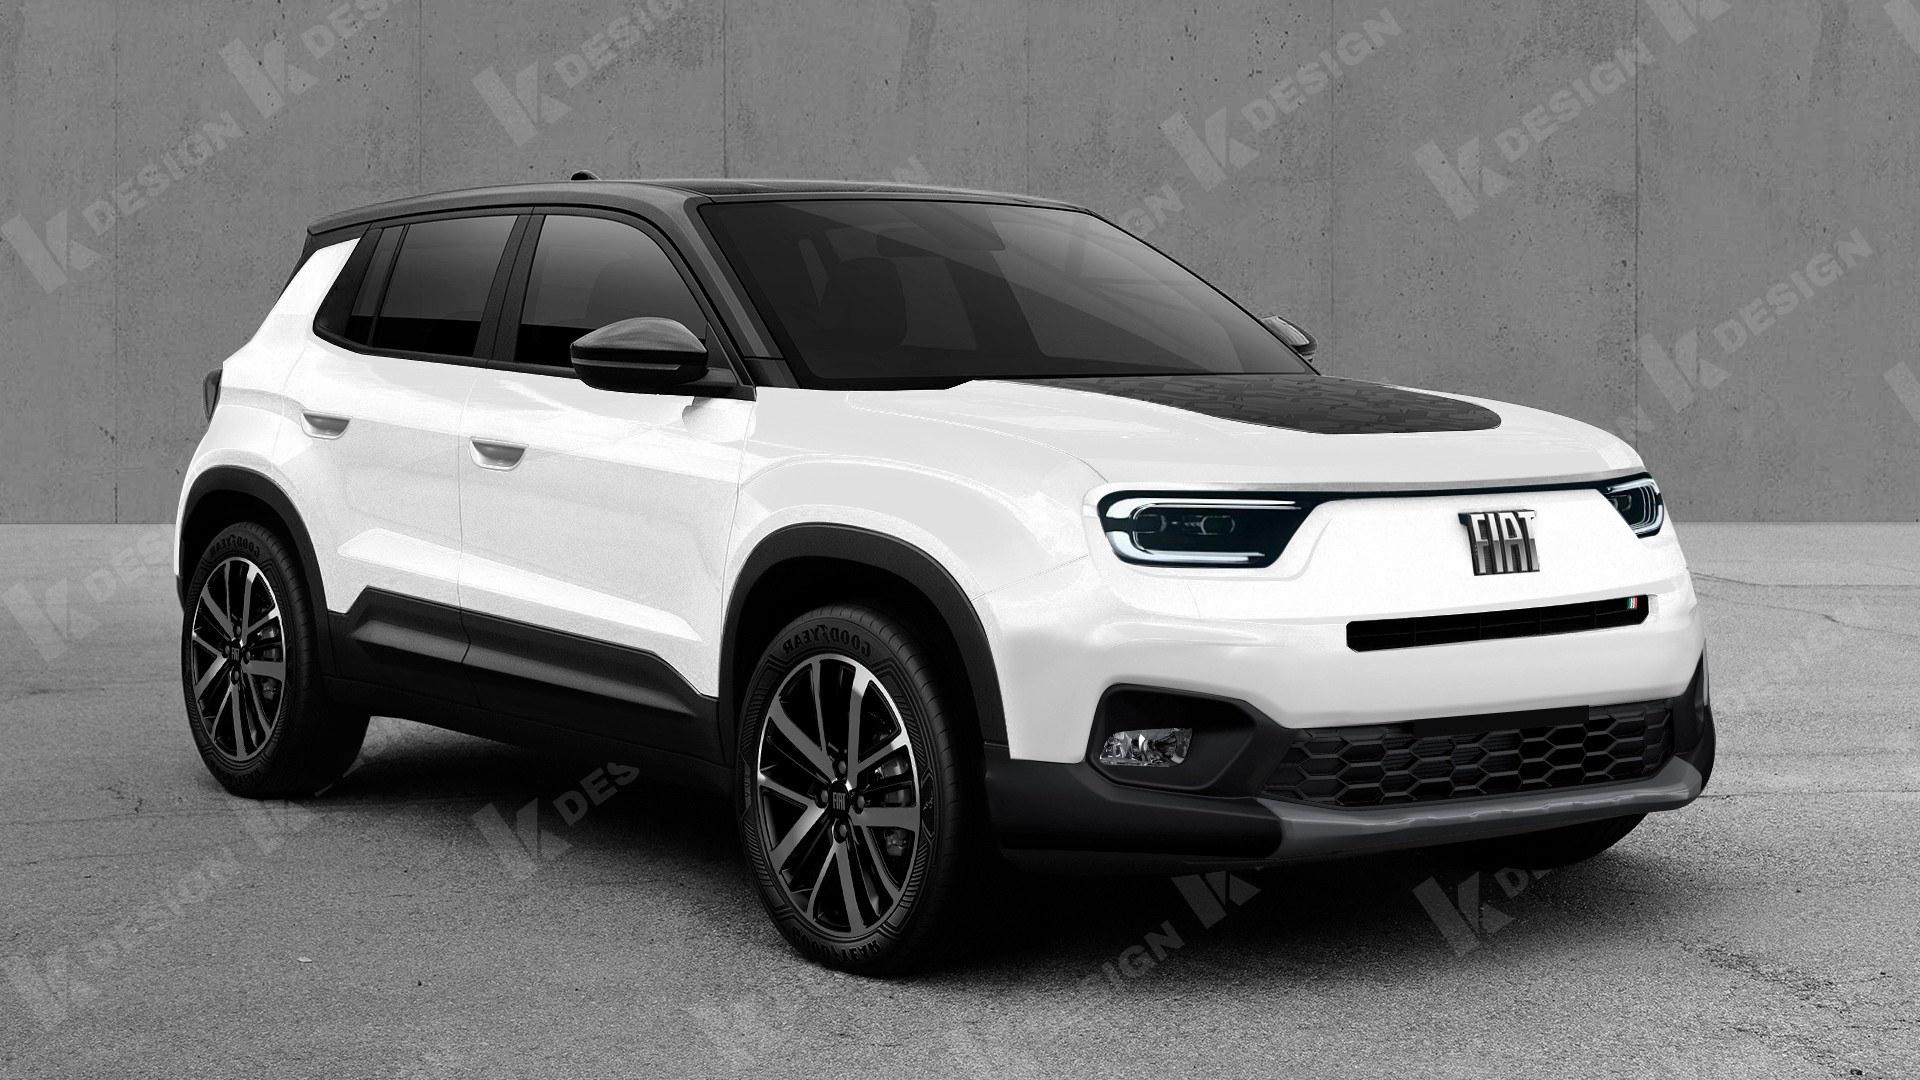 2023 fiat uno morphs jeep ev into ice subcompact crossover suv to set itself apart 6